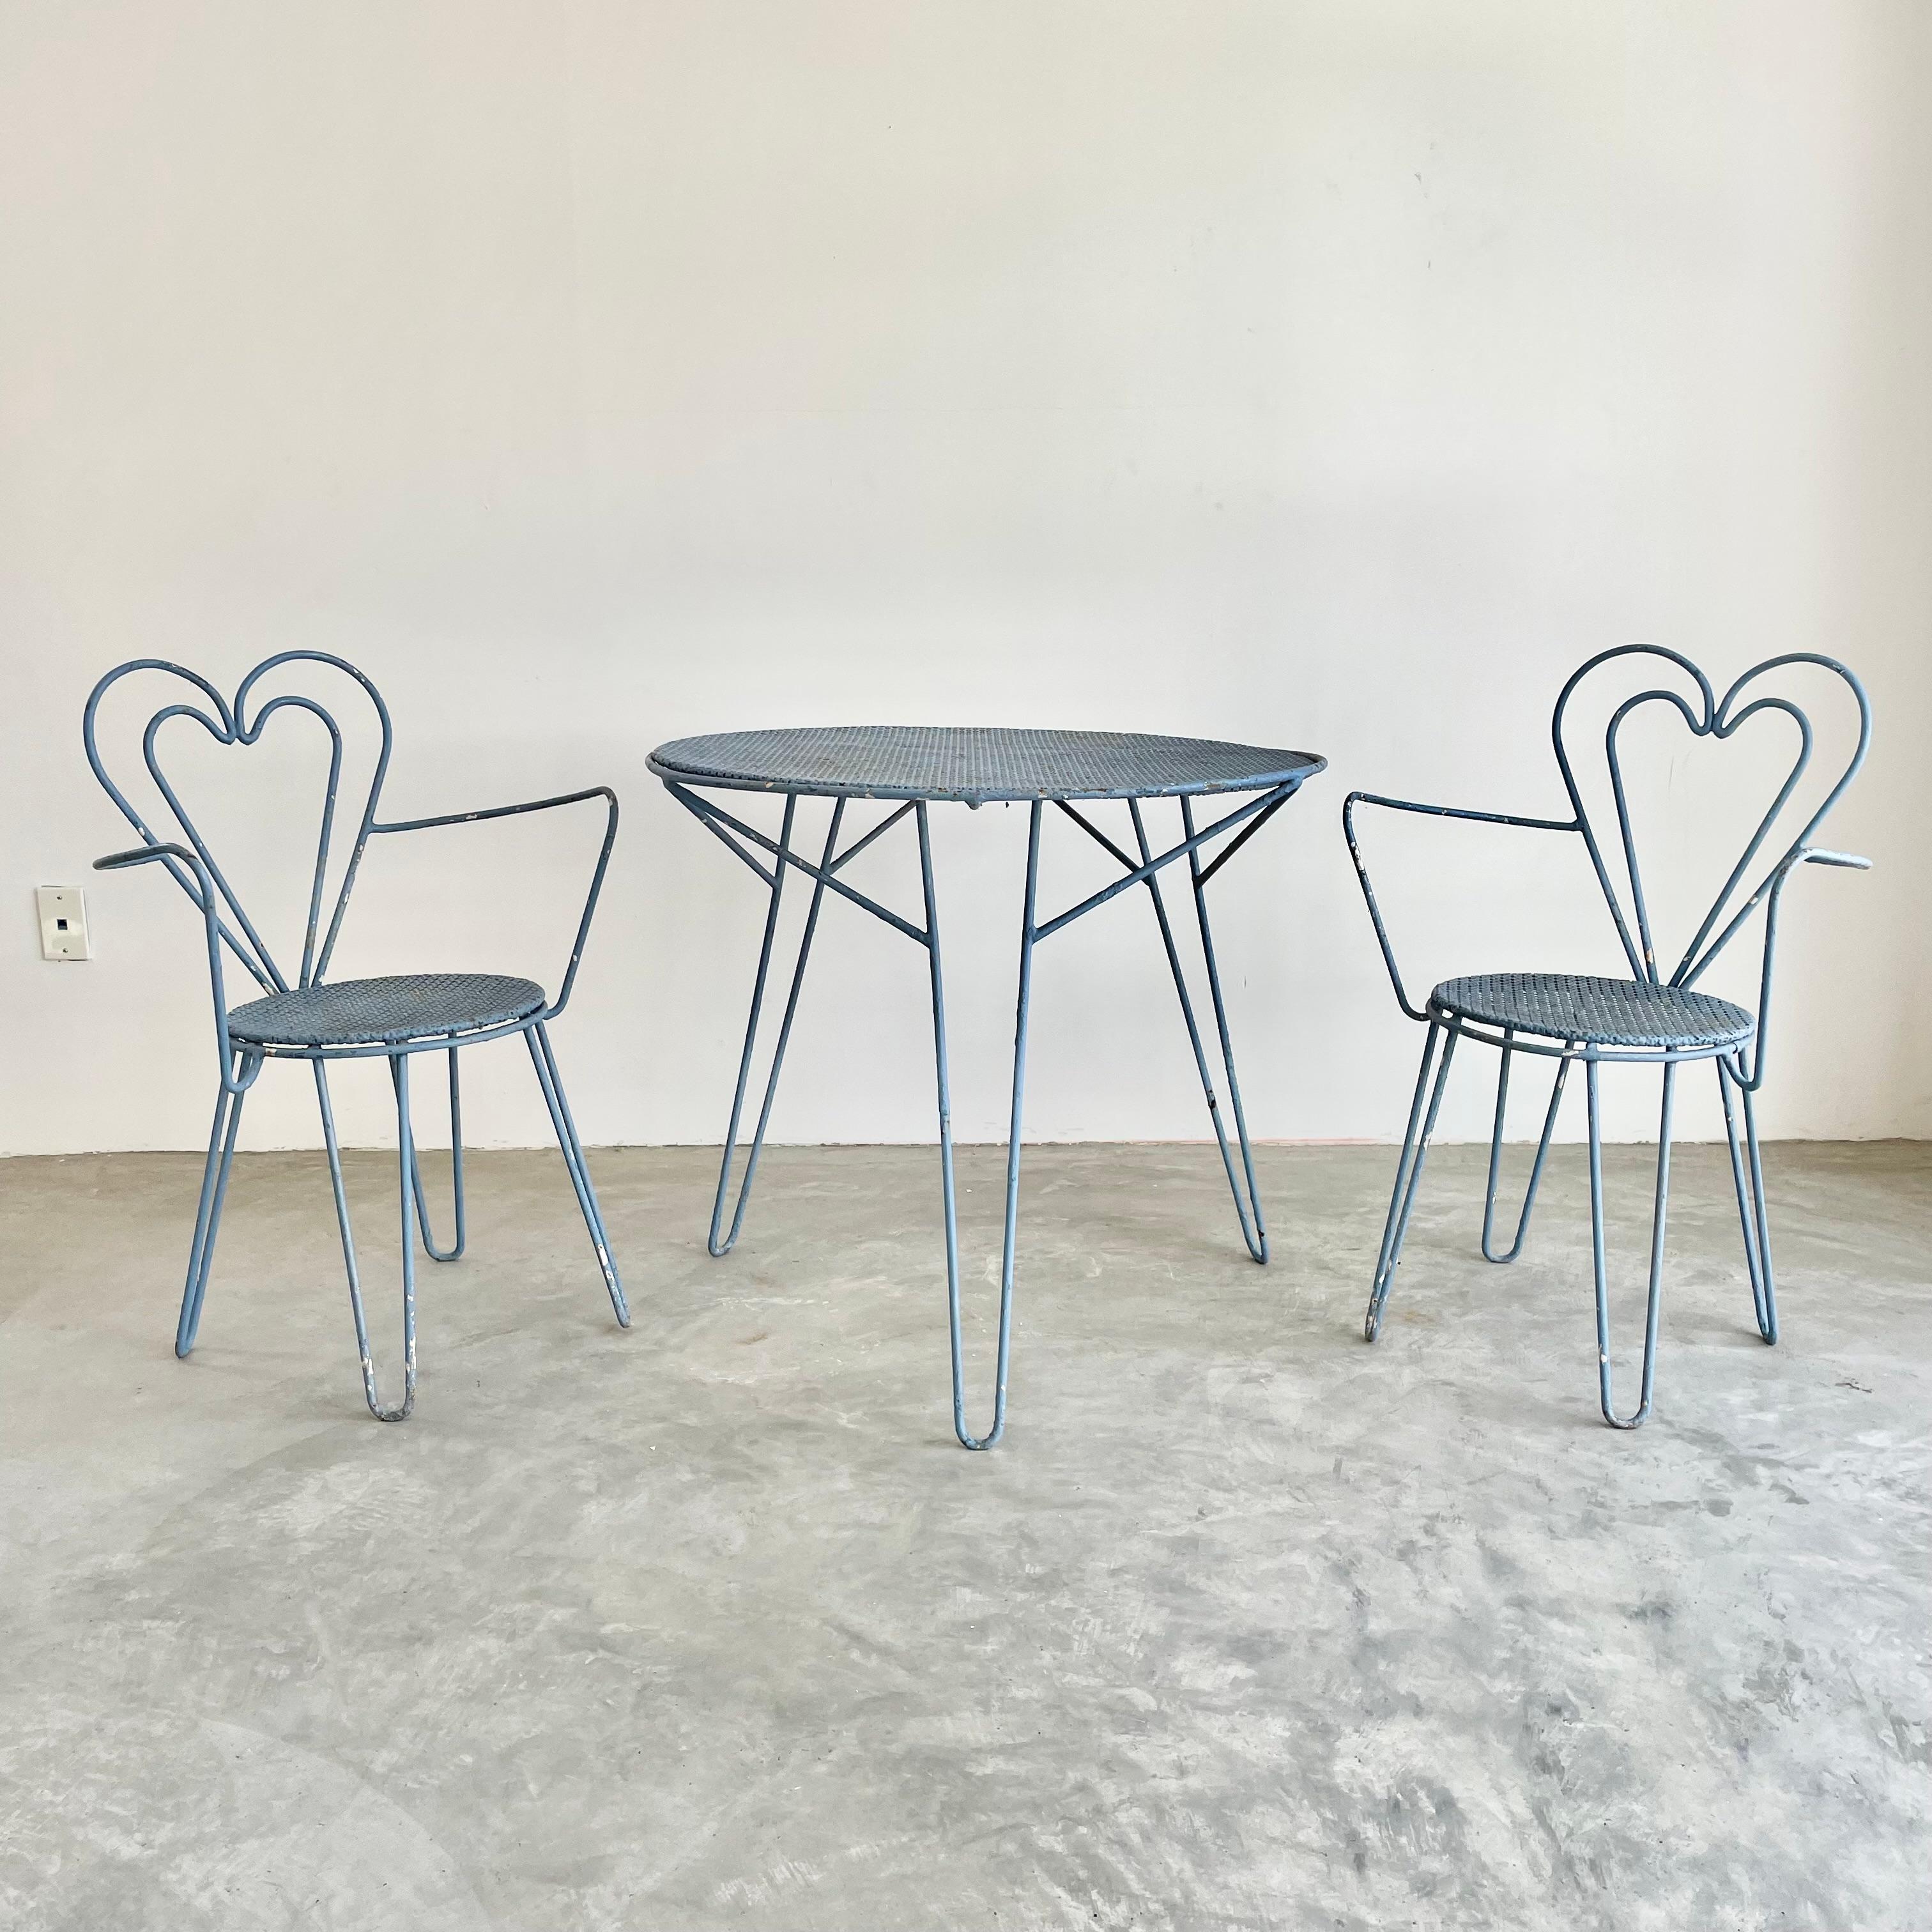 Rare metal dining set by French designer Mathieu Matégot. Entire set is in a stunning pastel blue. Sturdy metal chairs and table all with hairpin legs with signature Mategot perforated metal seats and table top. Chairs feature a beautiful heart